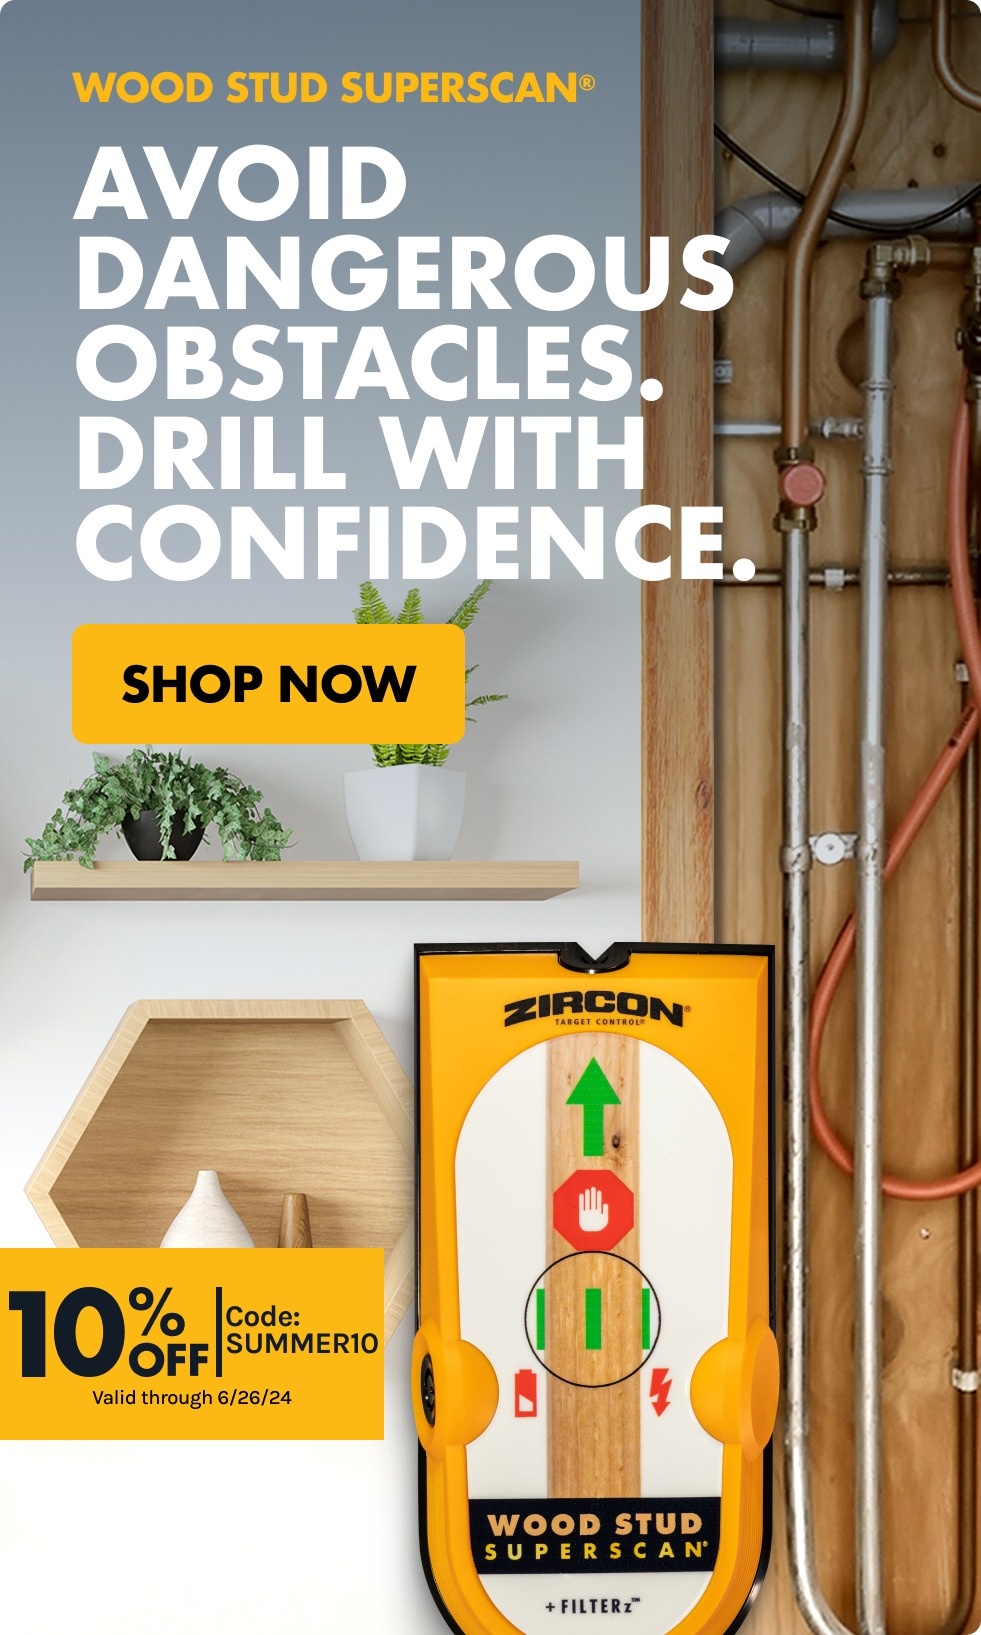 Wood Stud SuperScan: Avoid dangerous obstacles. Drill with confidence. 